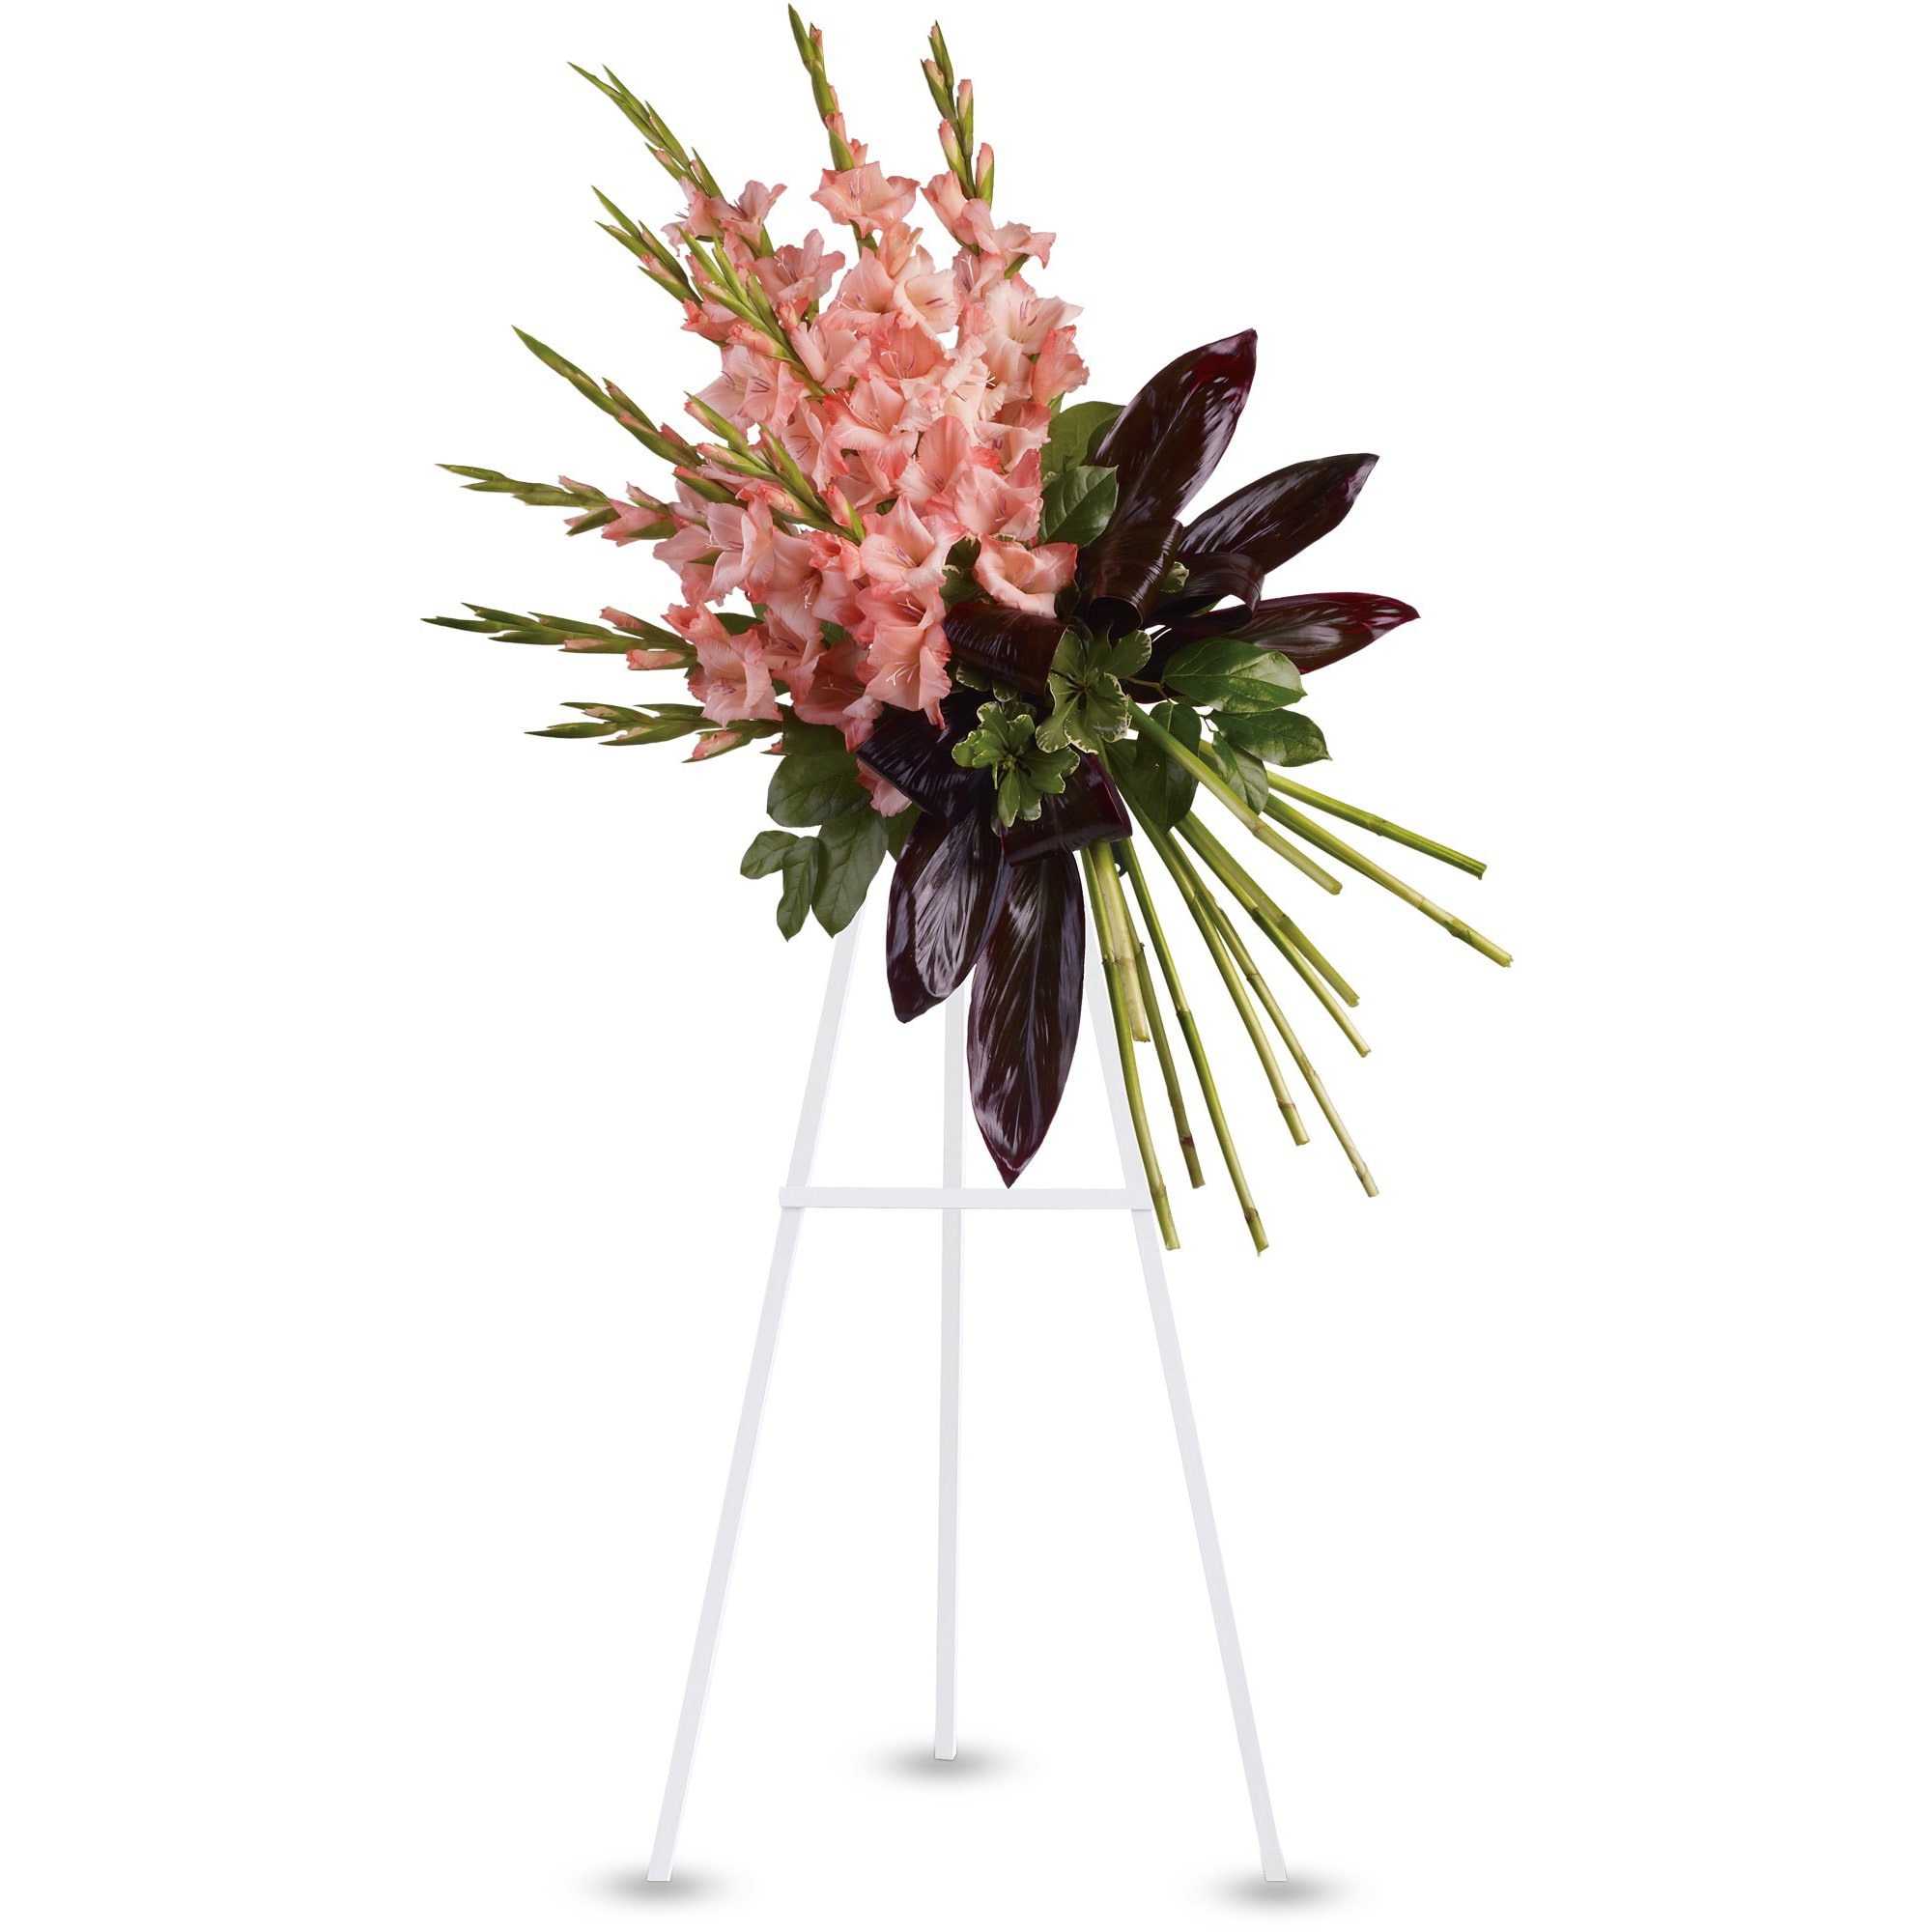 Elegant Tribute Spray by Teleflora - While beautiful and striking gladioli often symbolize strength and dignity, this dazzling coral display acknowledges a passion for living life to its fullest. A message that will surely be appreciated by anyone mourning a loved one. 